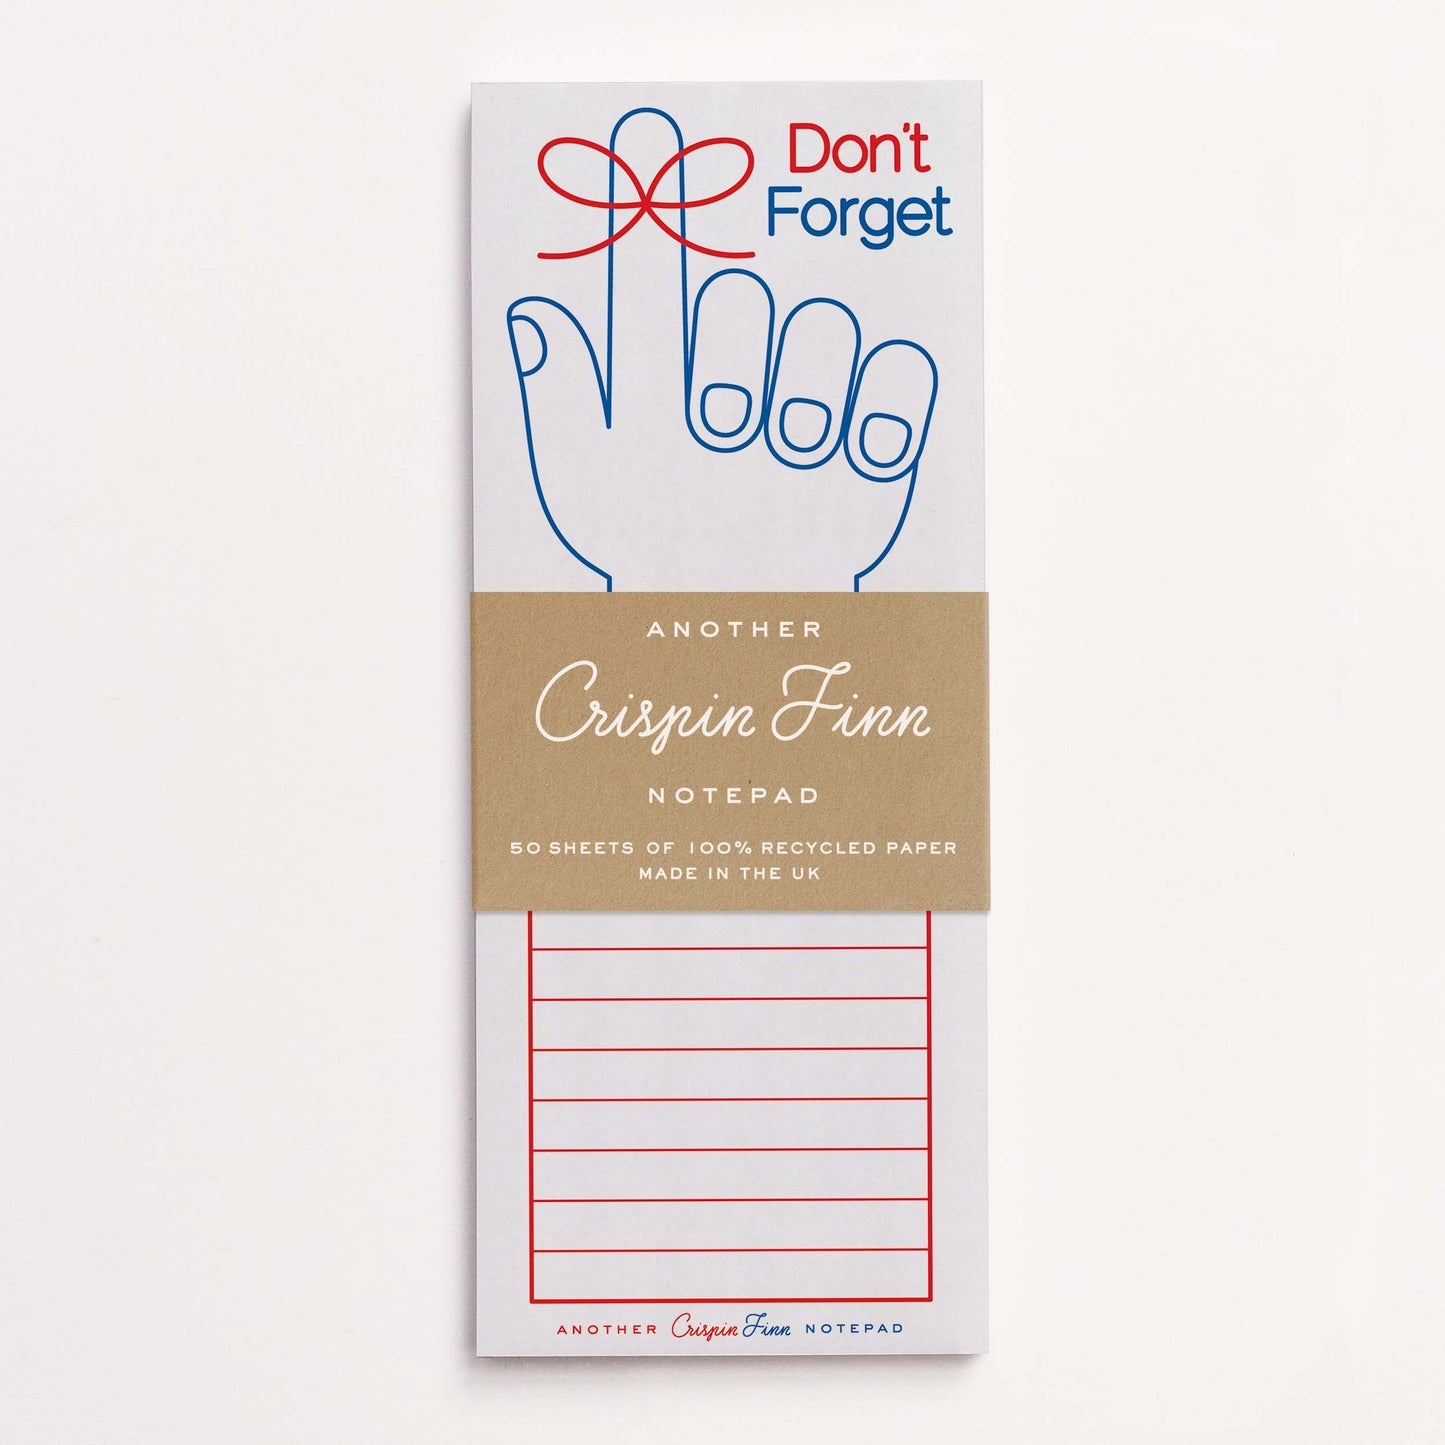 Crispin Finn - Don't Forget Note Pad